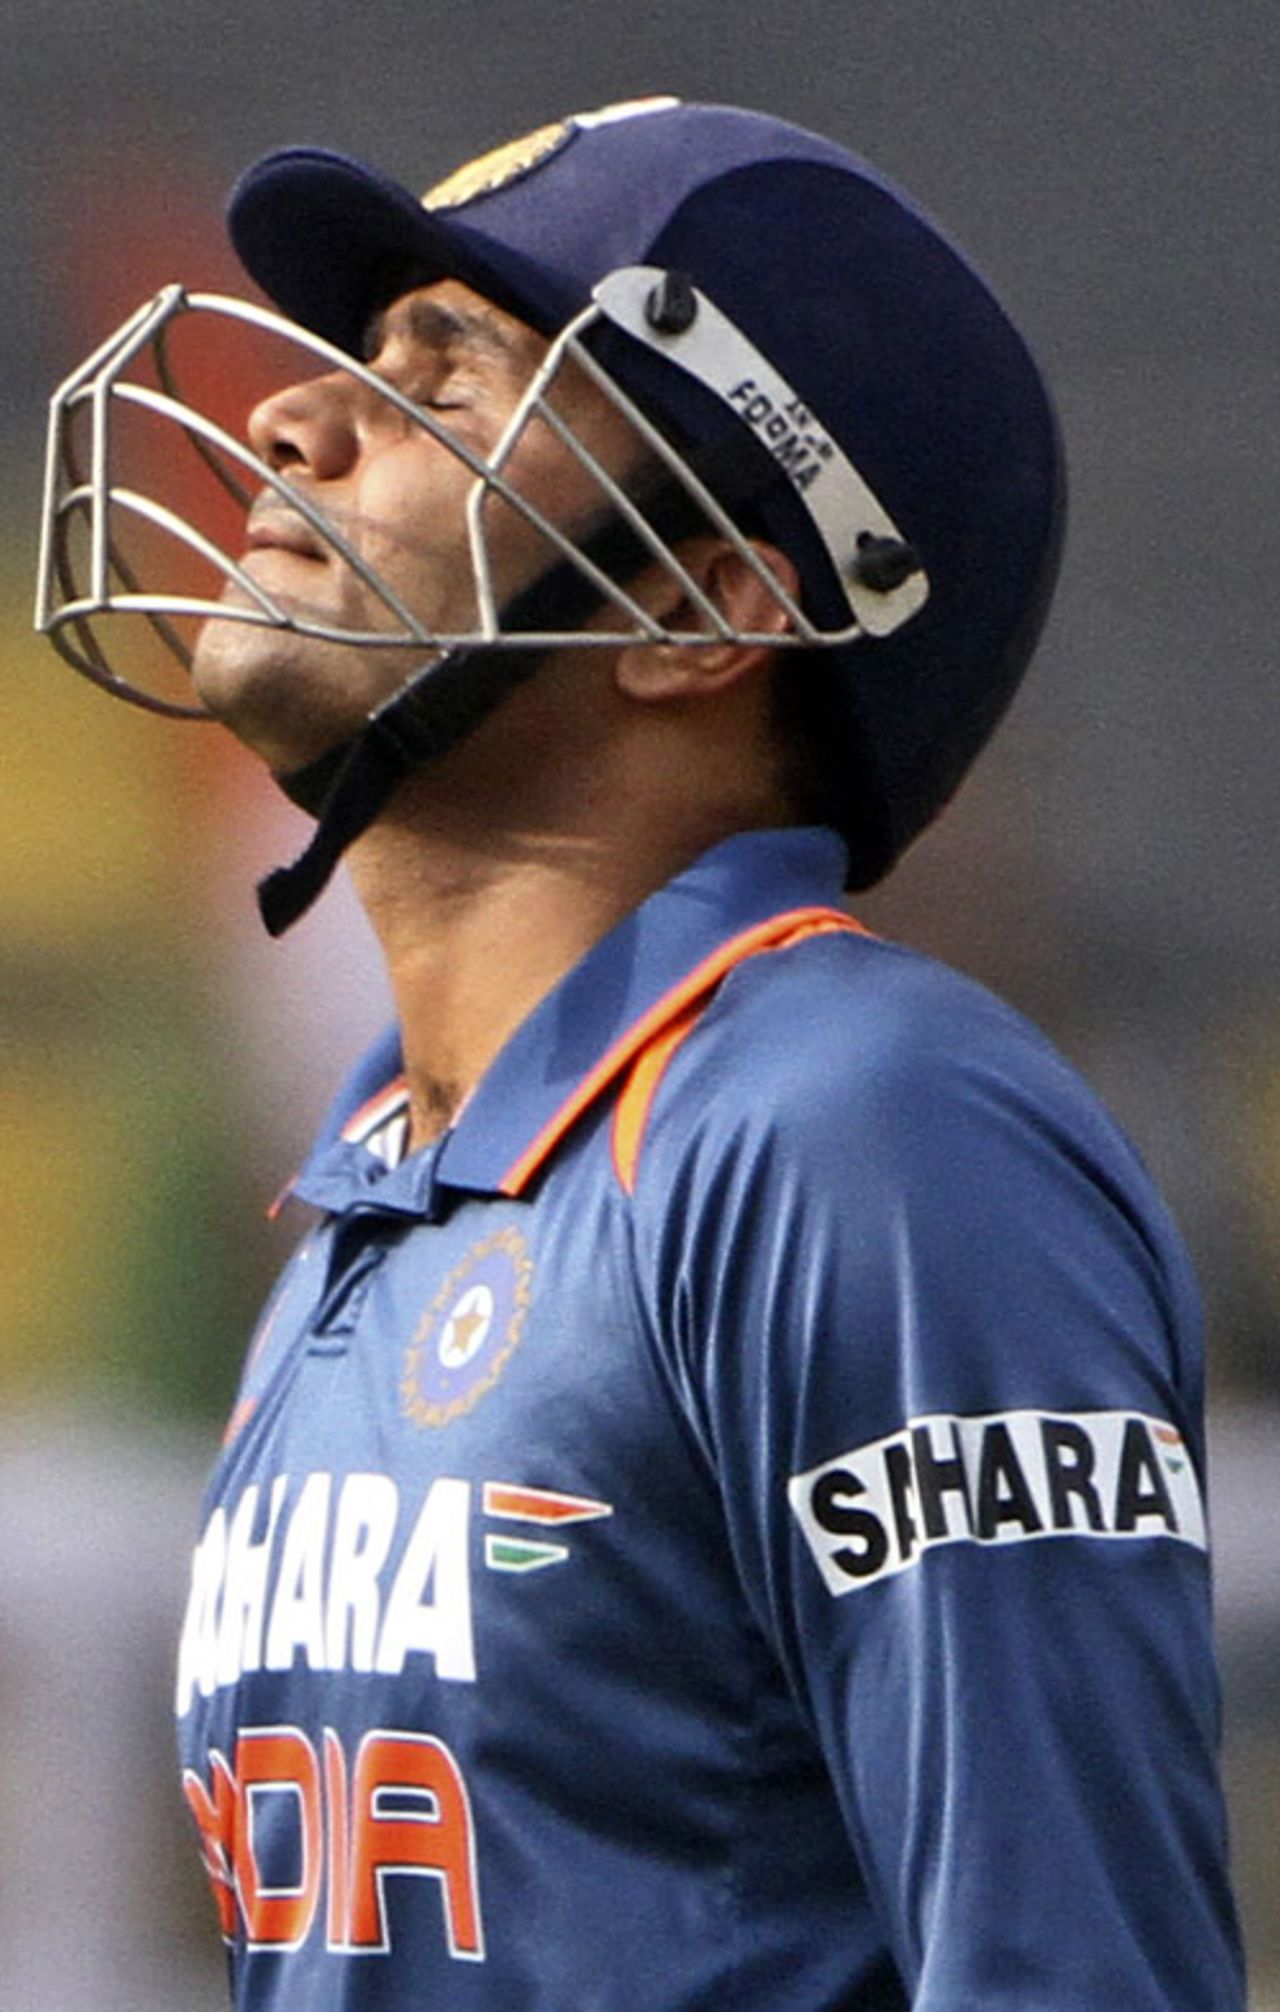 Virender Sehwag is disappointed with his shot selection, India v Sri Lanka, Tri-series final, Mirpur, January 13, 2010